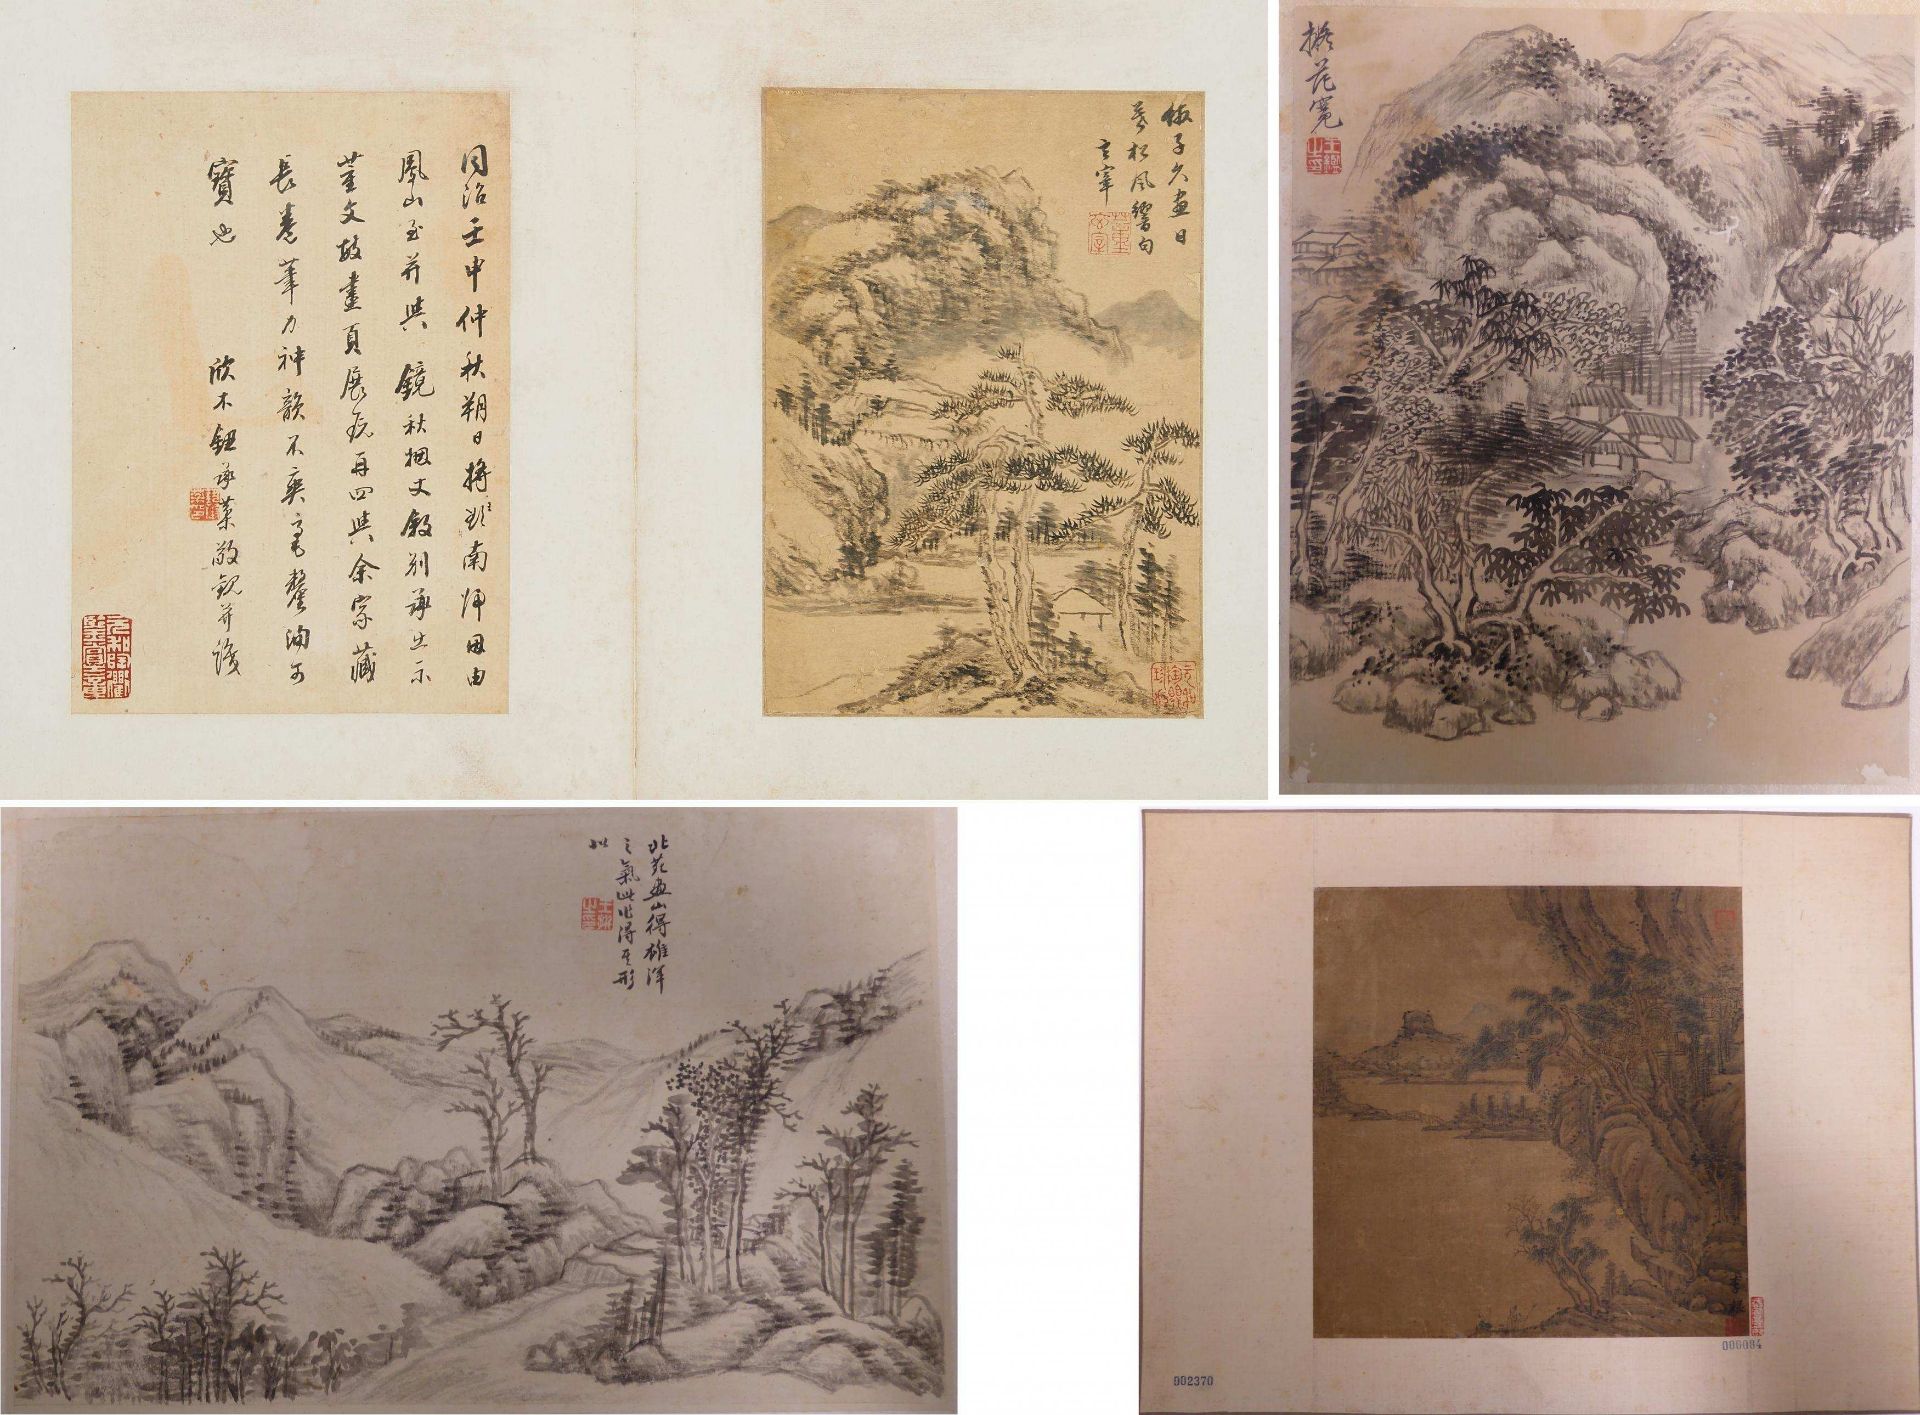 DONG, QICHANG 1555 Huating - 1636 - attributed. Mountainscape with pines. China. Late Ming dynasty